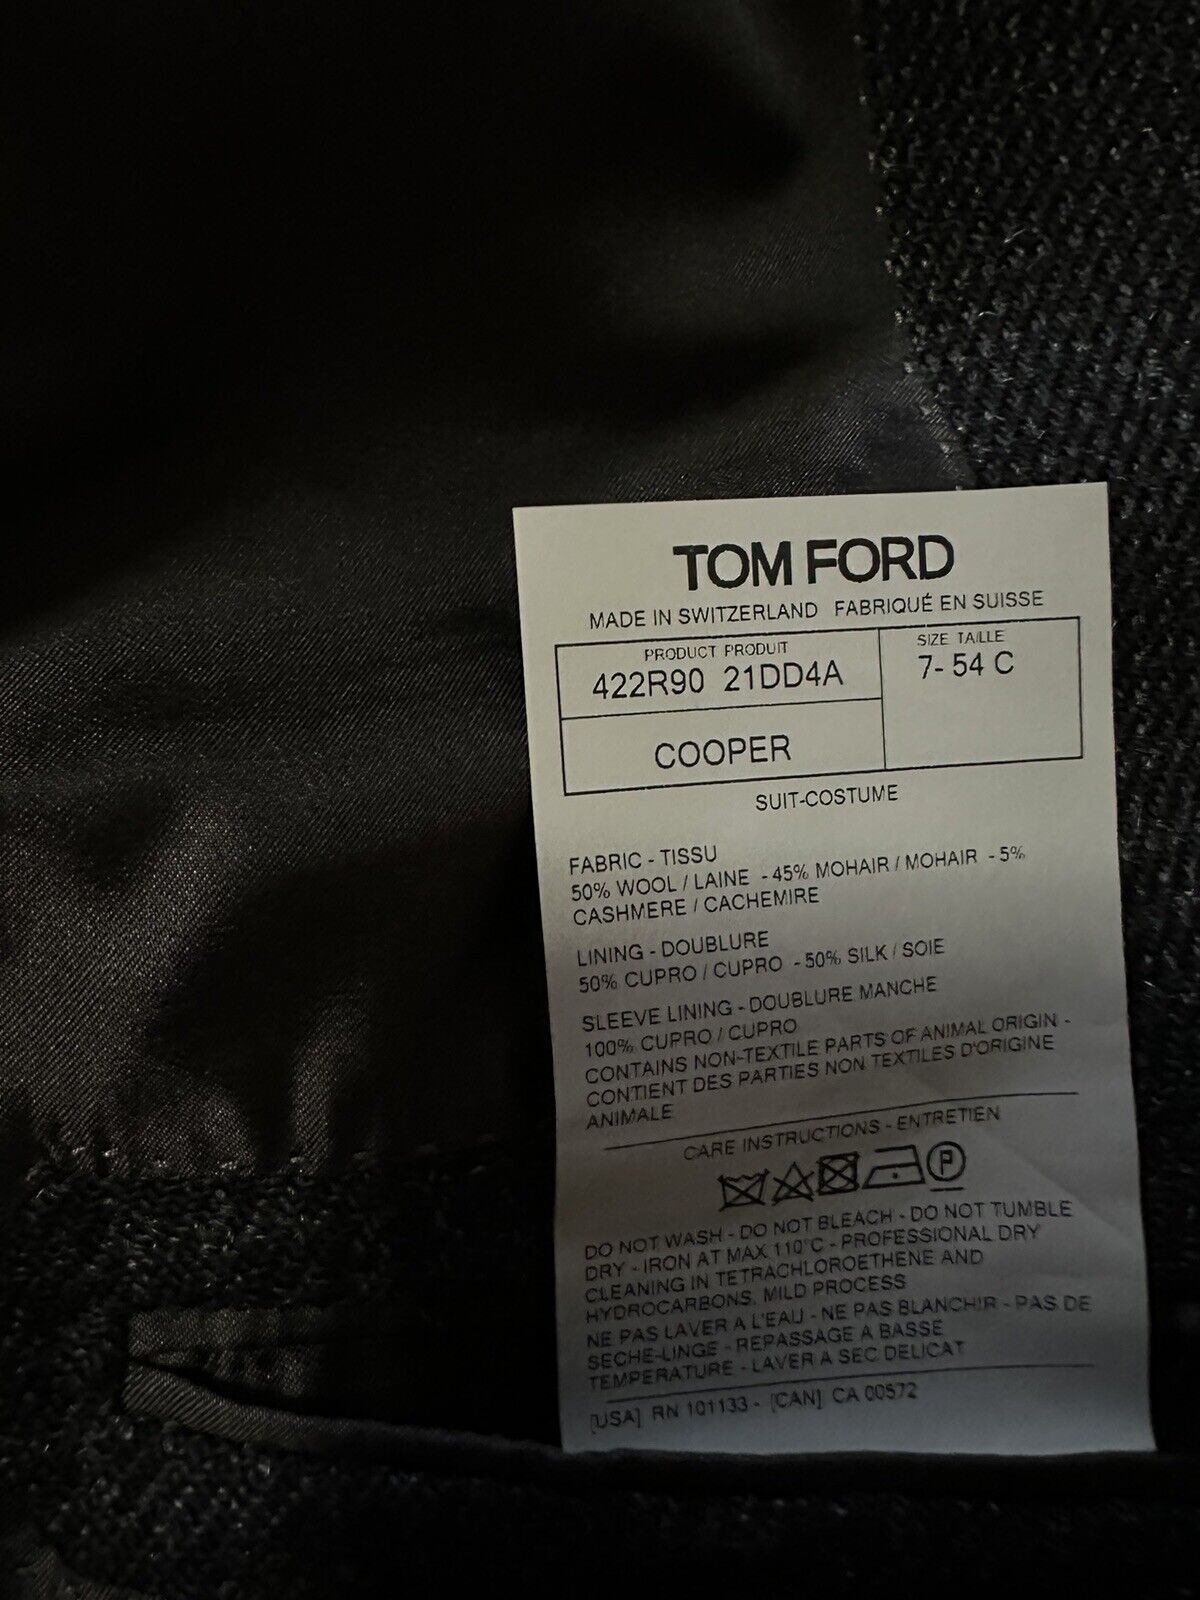 New $6530 TOM FORD Men Double Breasted Suit DK Gray Charcoal 43 US/54 Eu Switz.